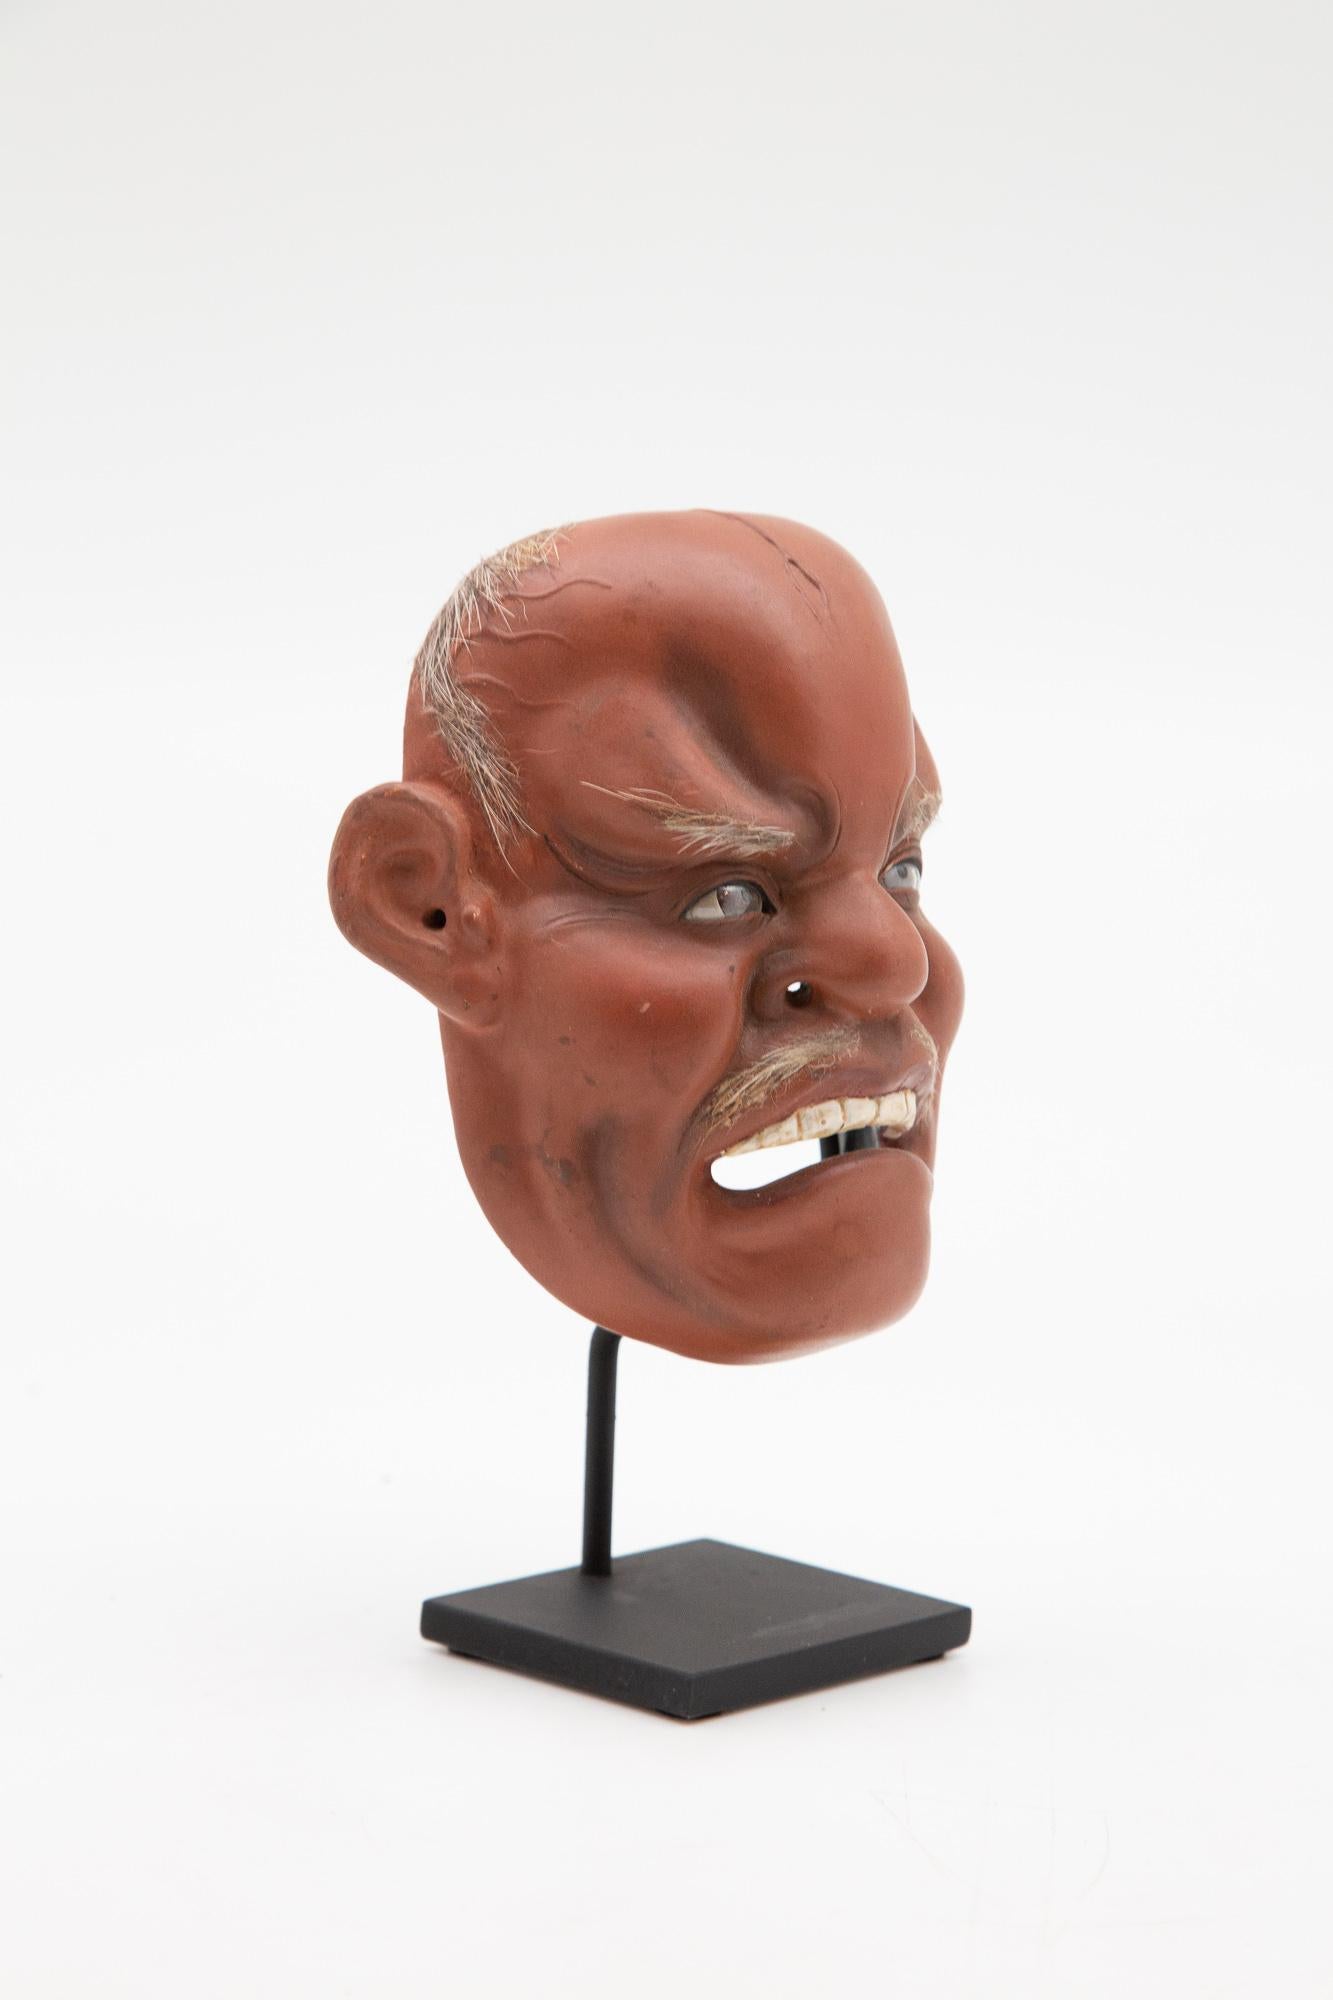 Medium Japanese Papier-Mâché (19th Century) Iki Ningyo mask or sometimes referred to as Noh mask, mounted on custom painted metal base.  Trimmed with natural hair and glass, painted glass eyes.